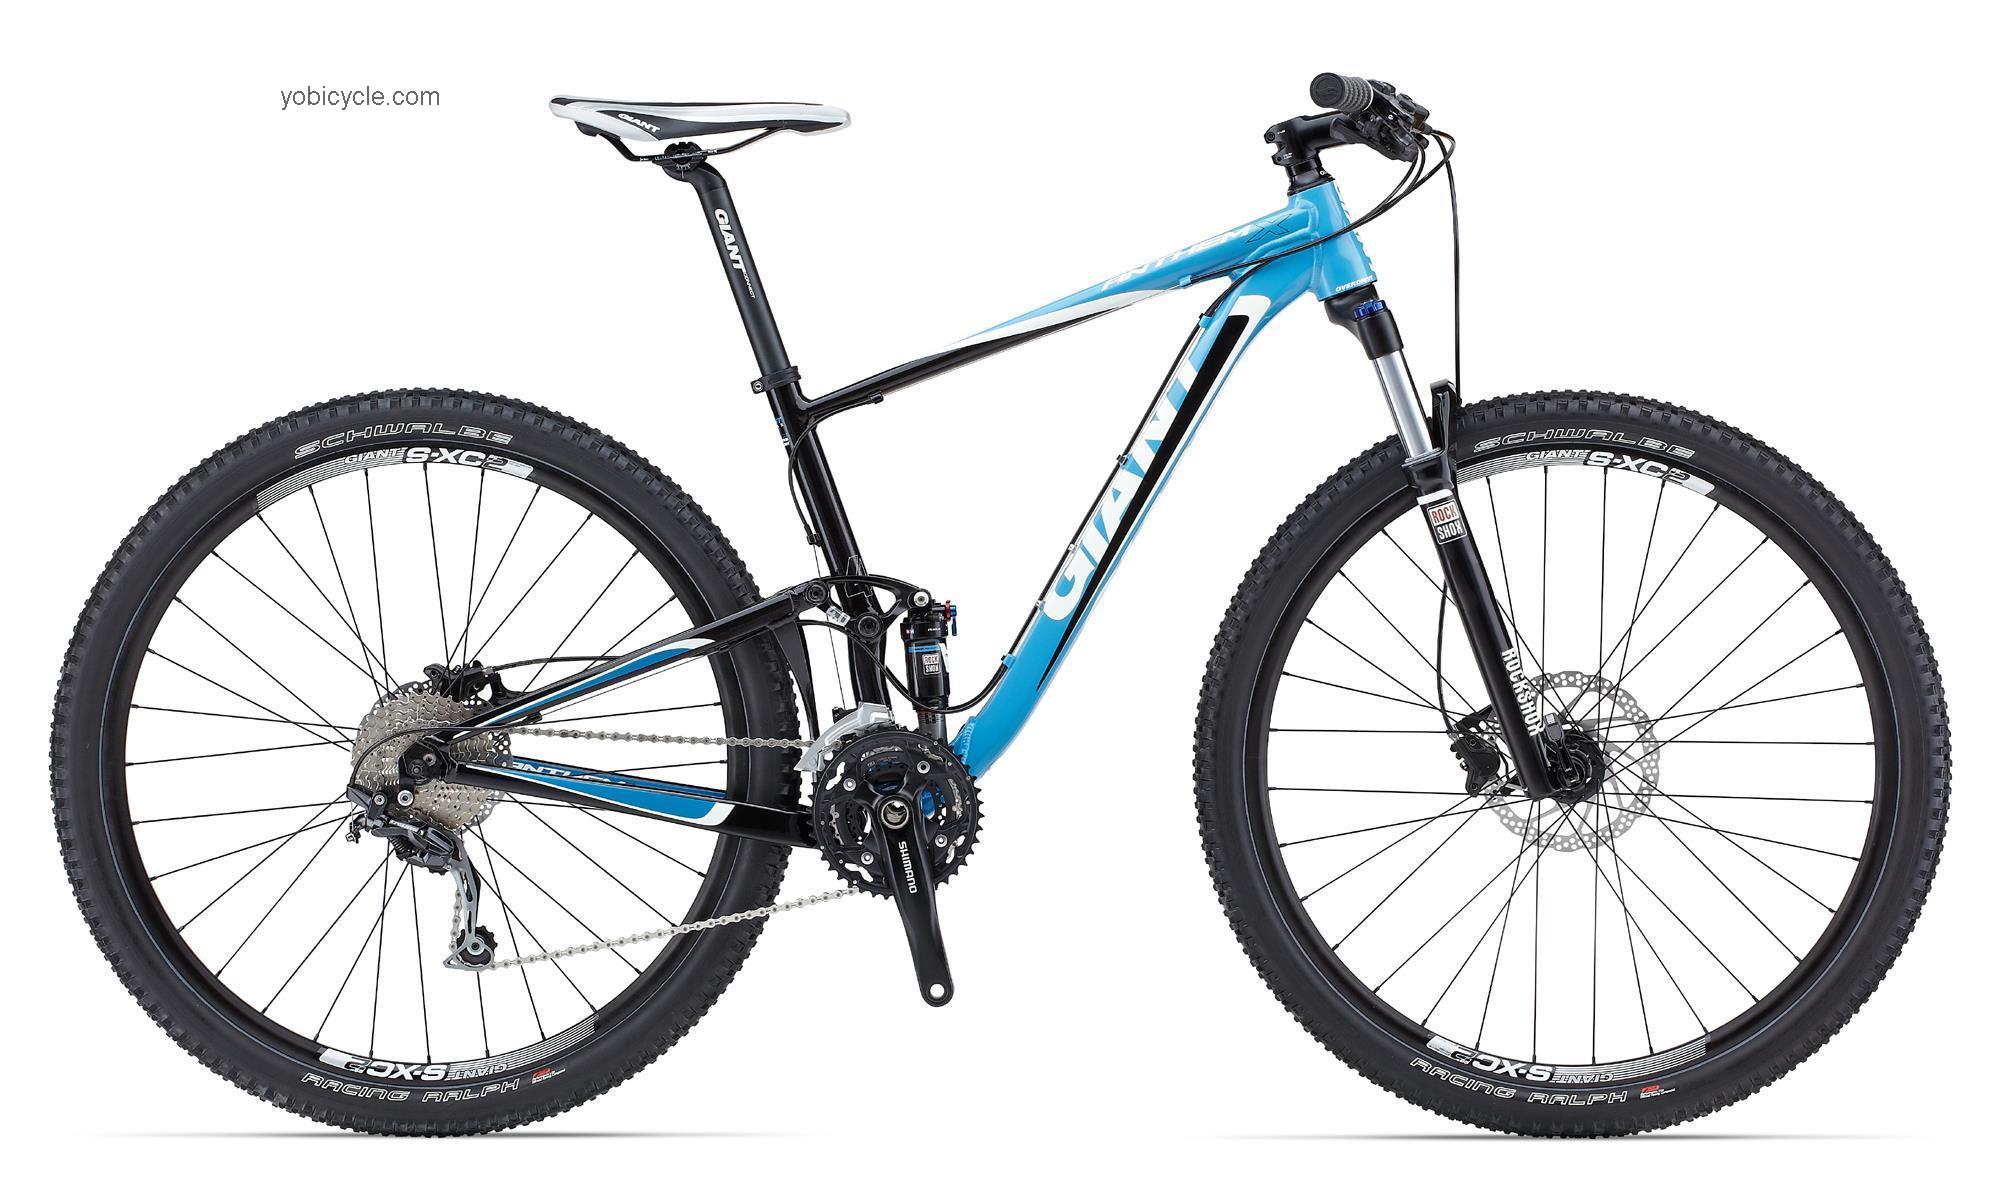 Giant Anthem X 29er 4 2013 comparison online with competitors